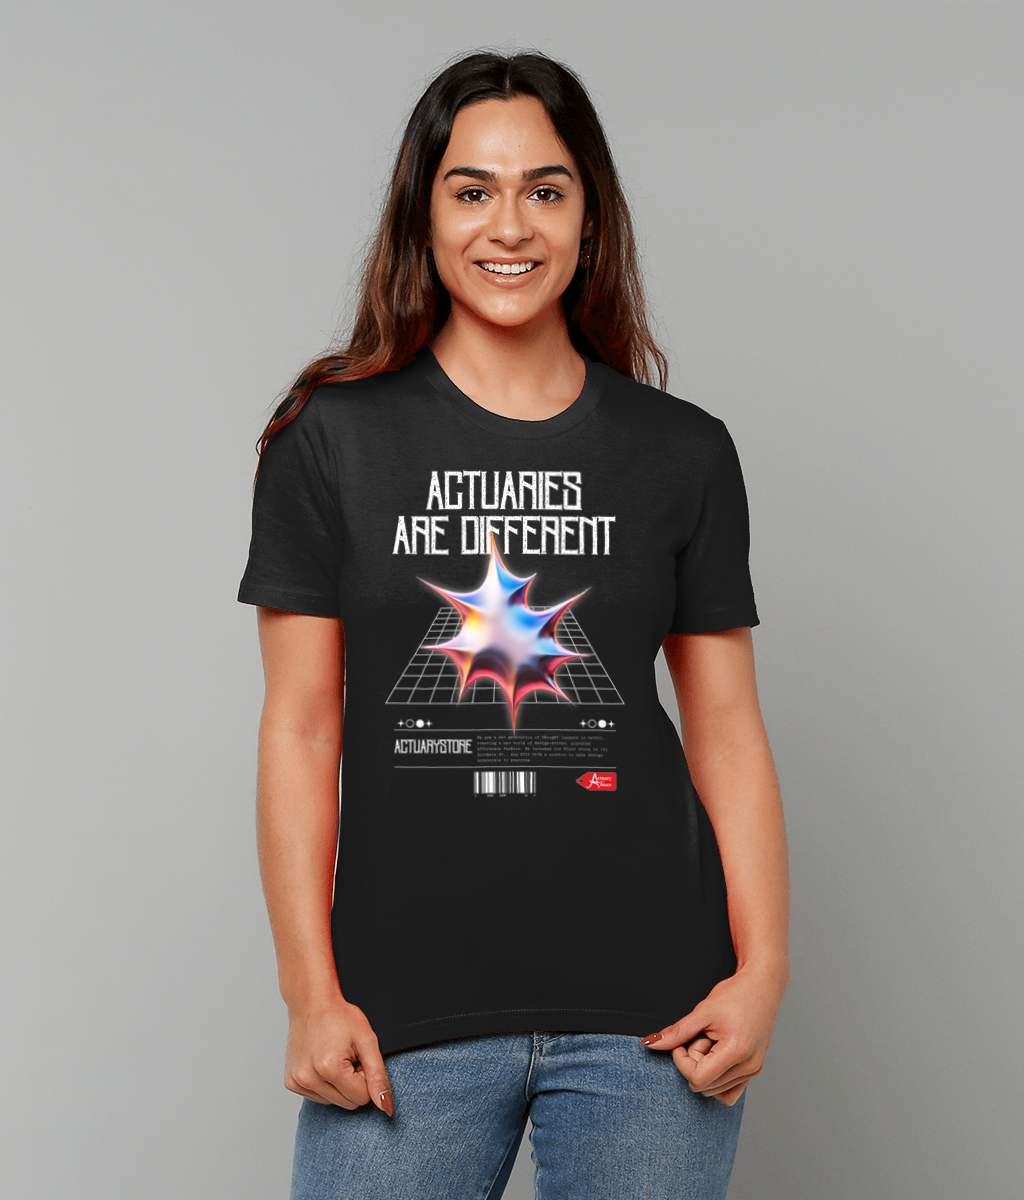 Actuaries Are Different Black Streetwear Aesthetic Quote 3D Chrome Black T-shirt